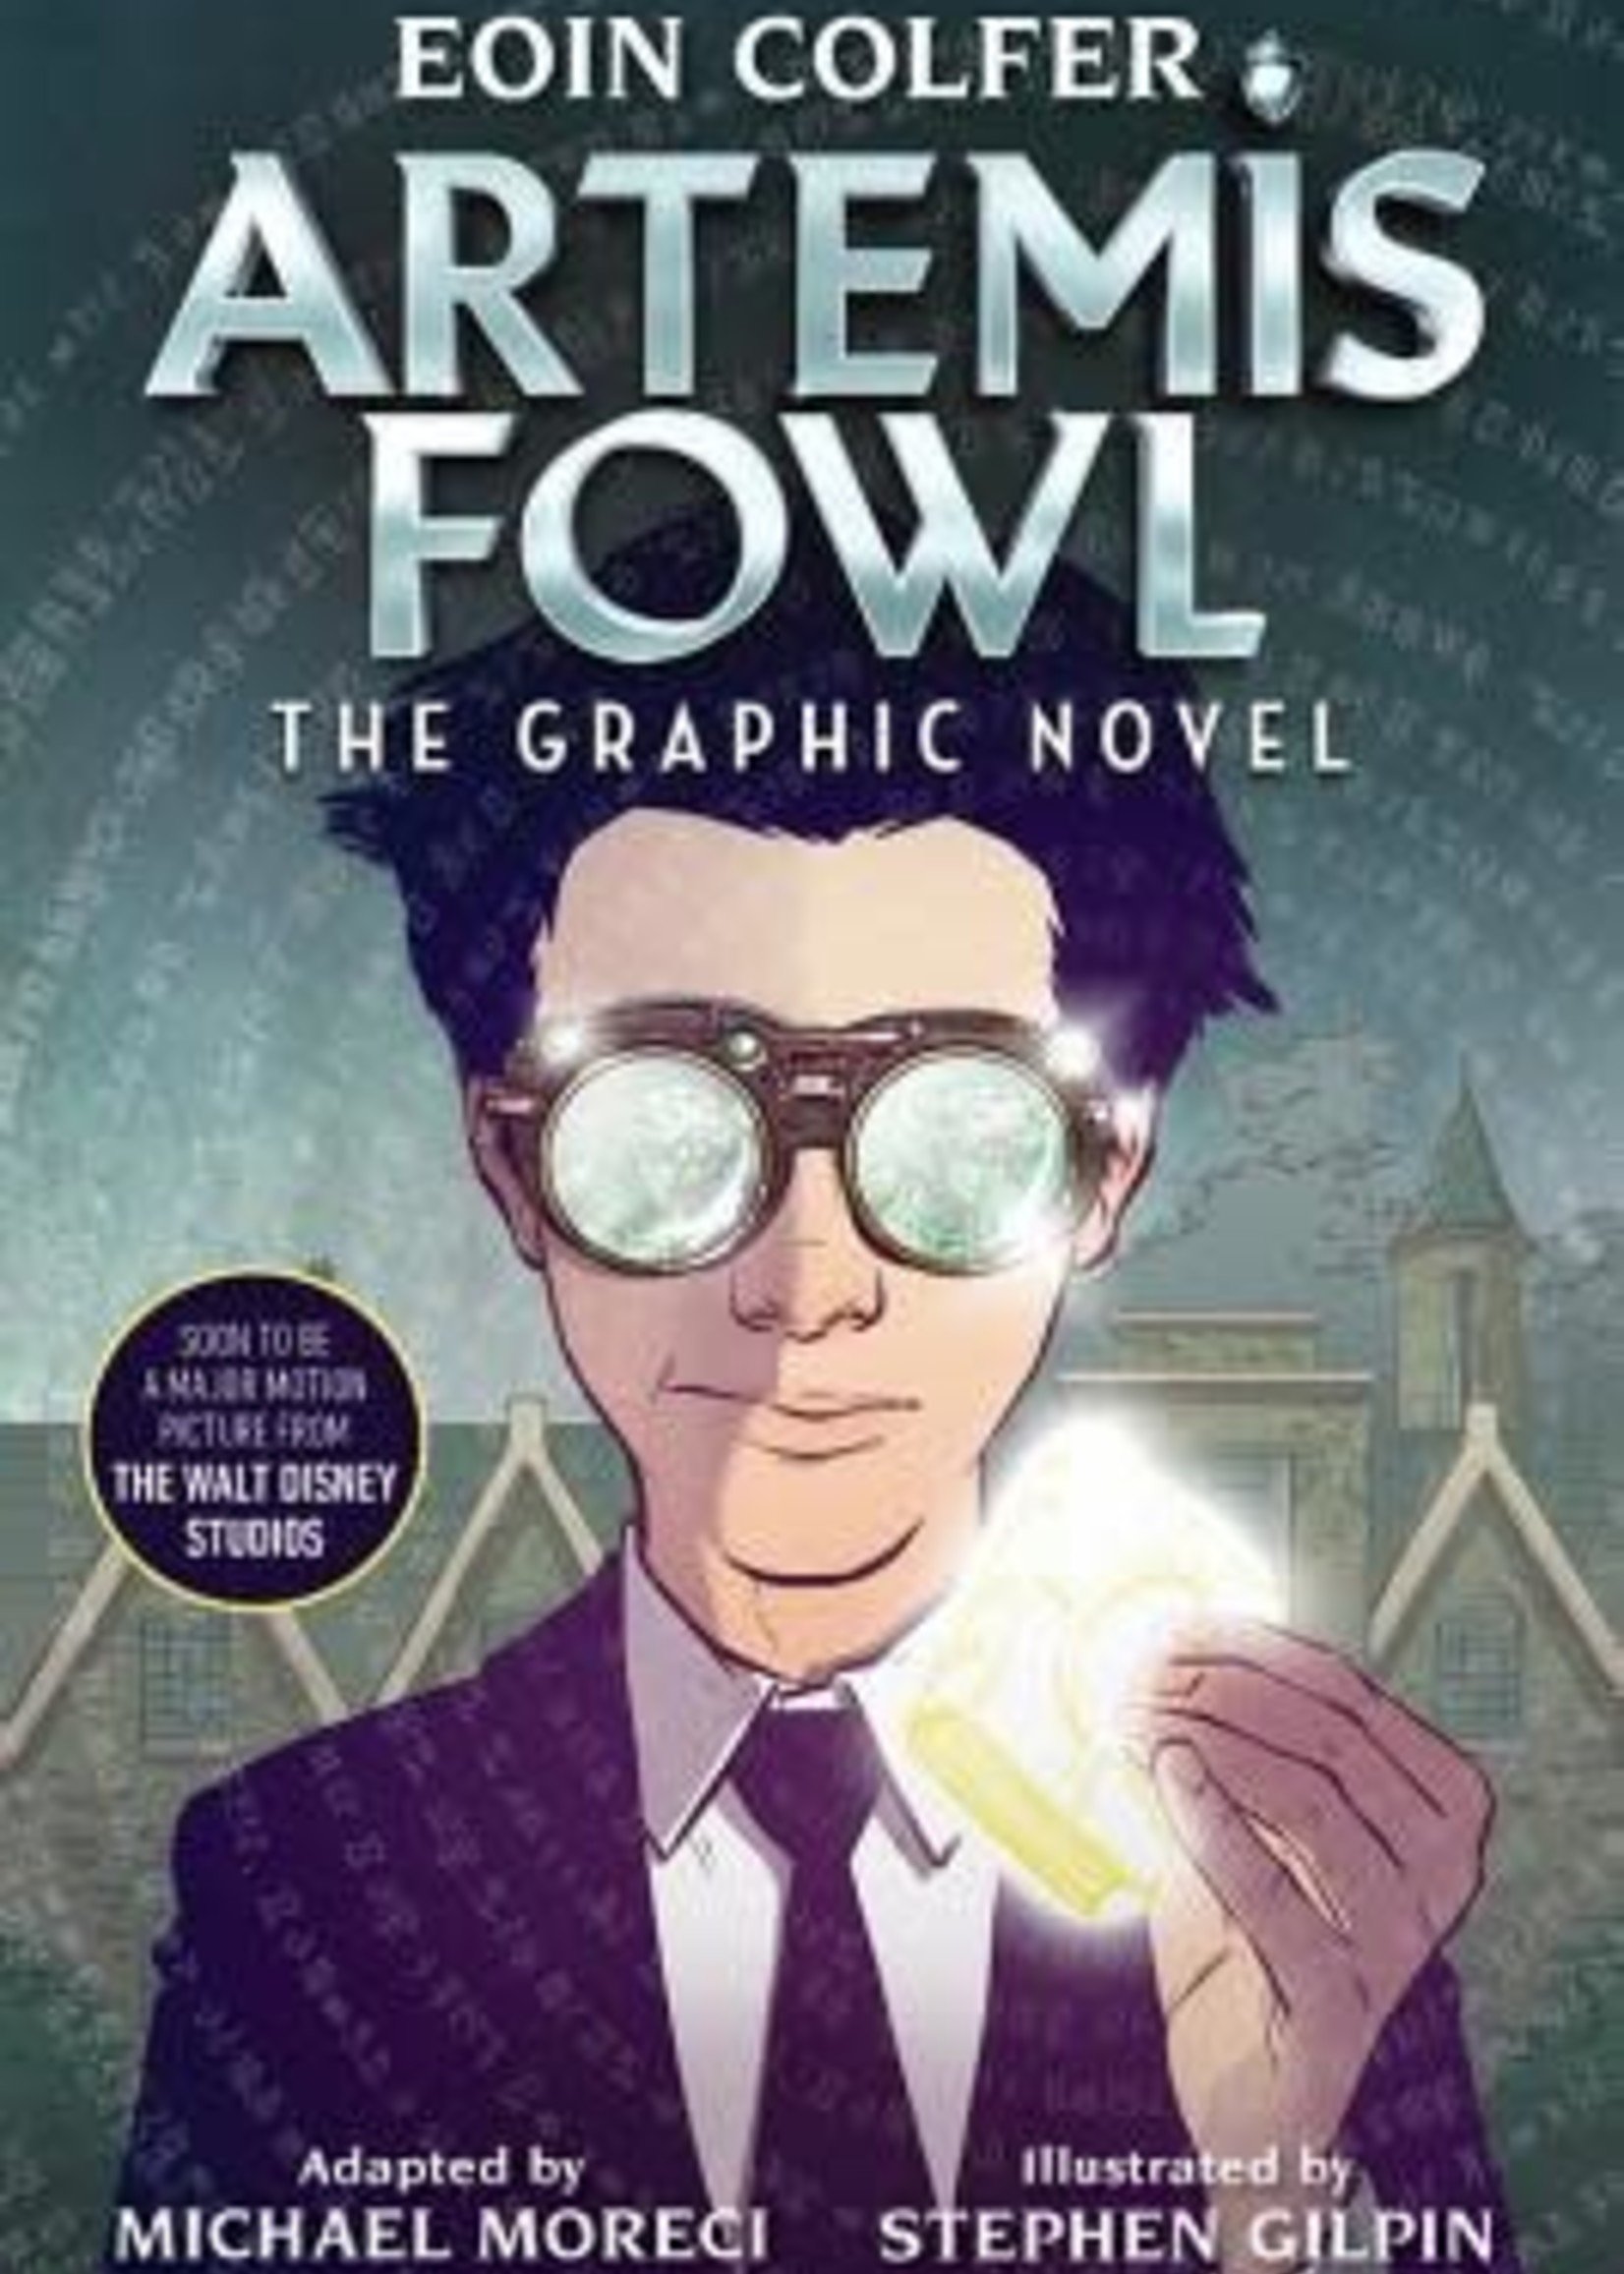 Artemis Fowl: The Graphic Novel (Artemis Fowl #1) by Eoin Colfer, Michael Moreci, Stephen Gilpin